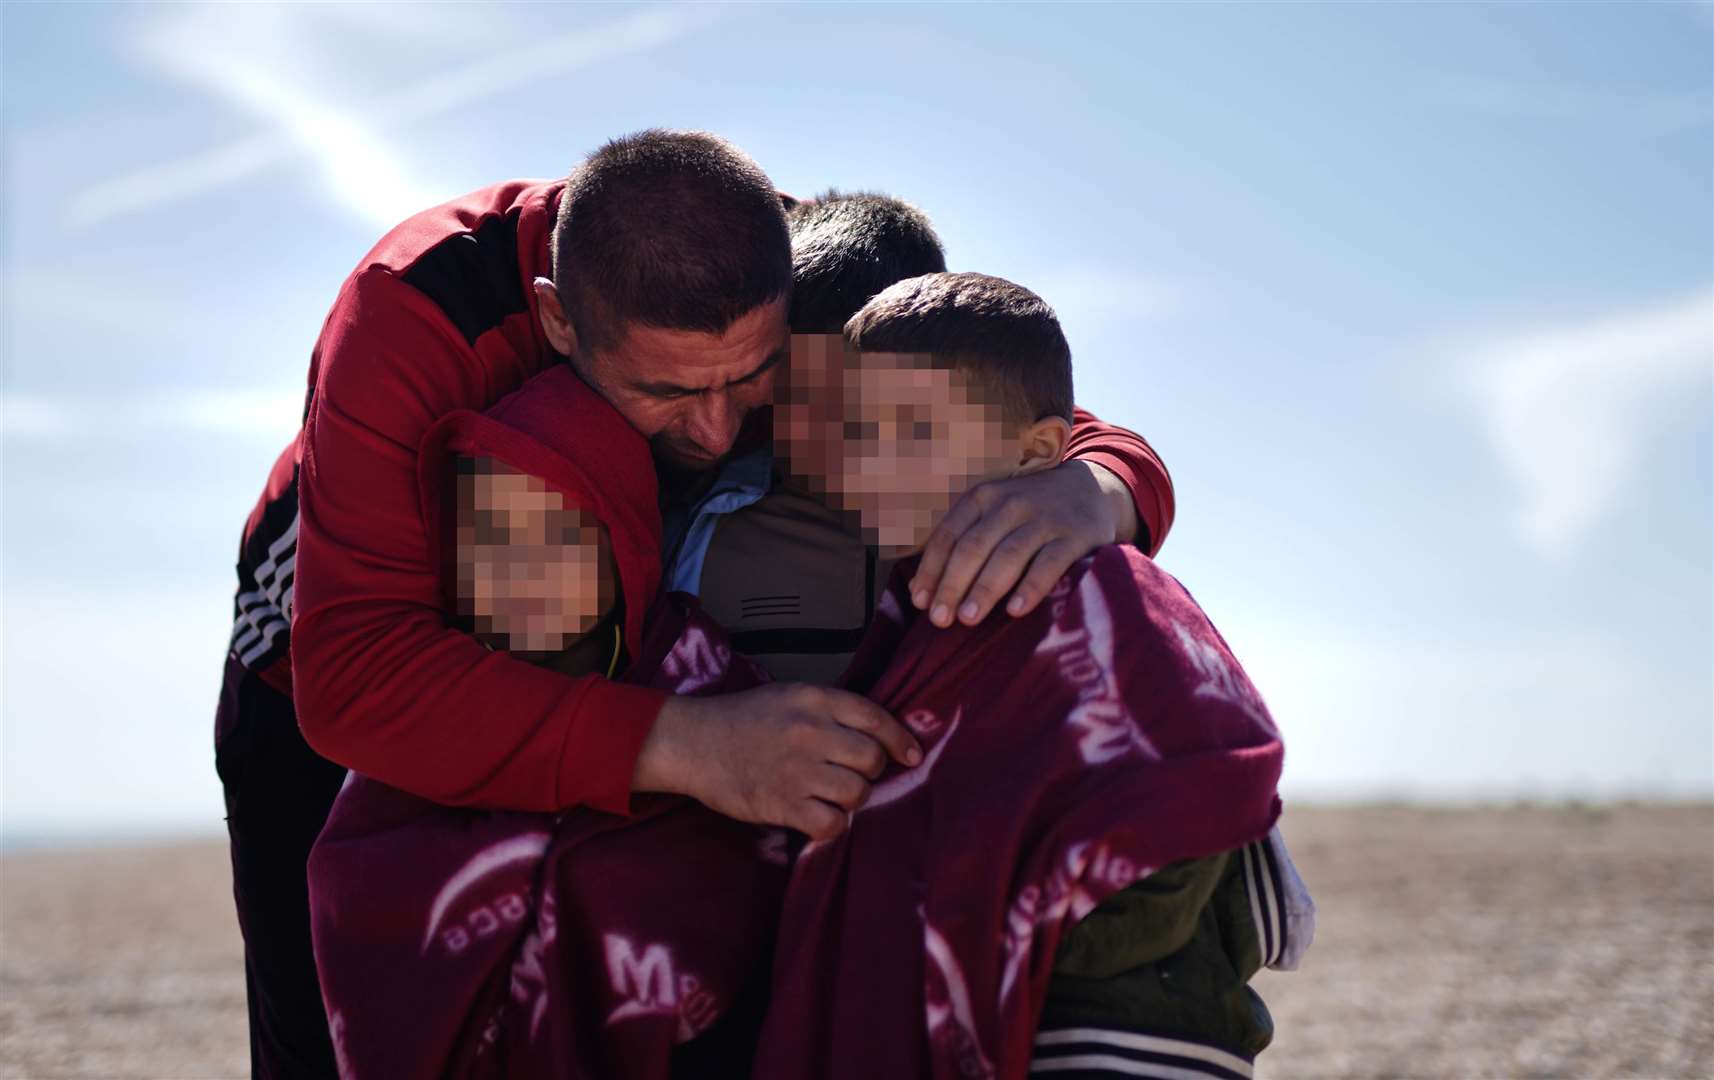 A man and children, thought to be asylum seekers, embrace after arriving in Dungeness (Jordan Pettitt/PA)